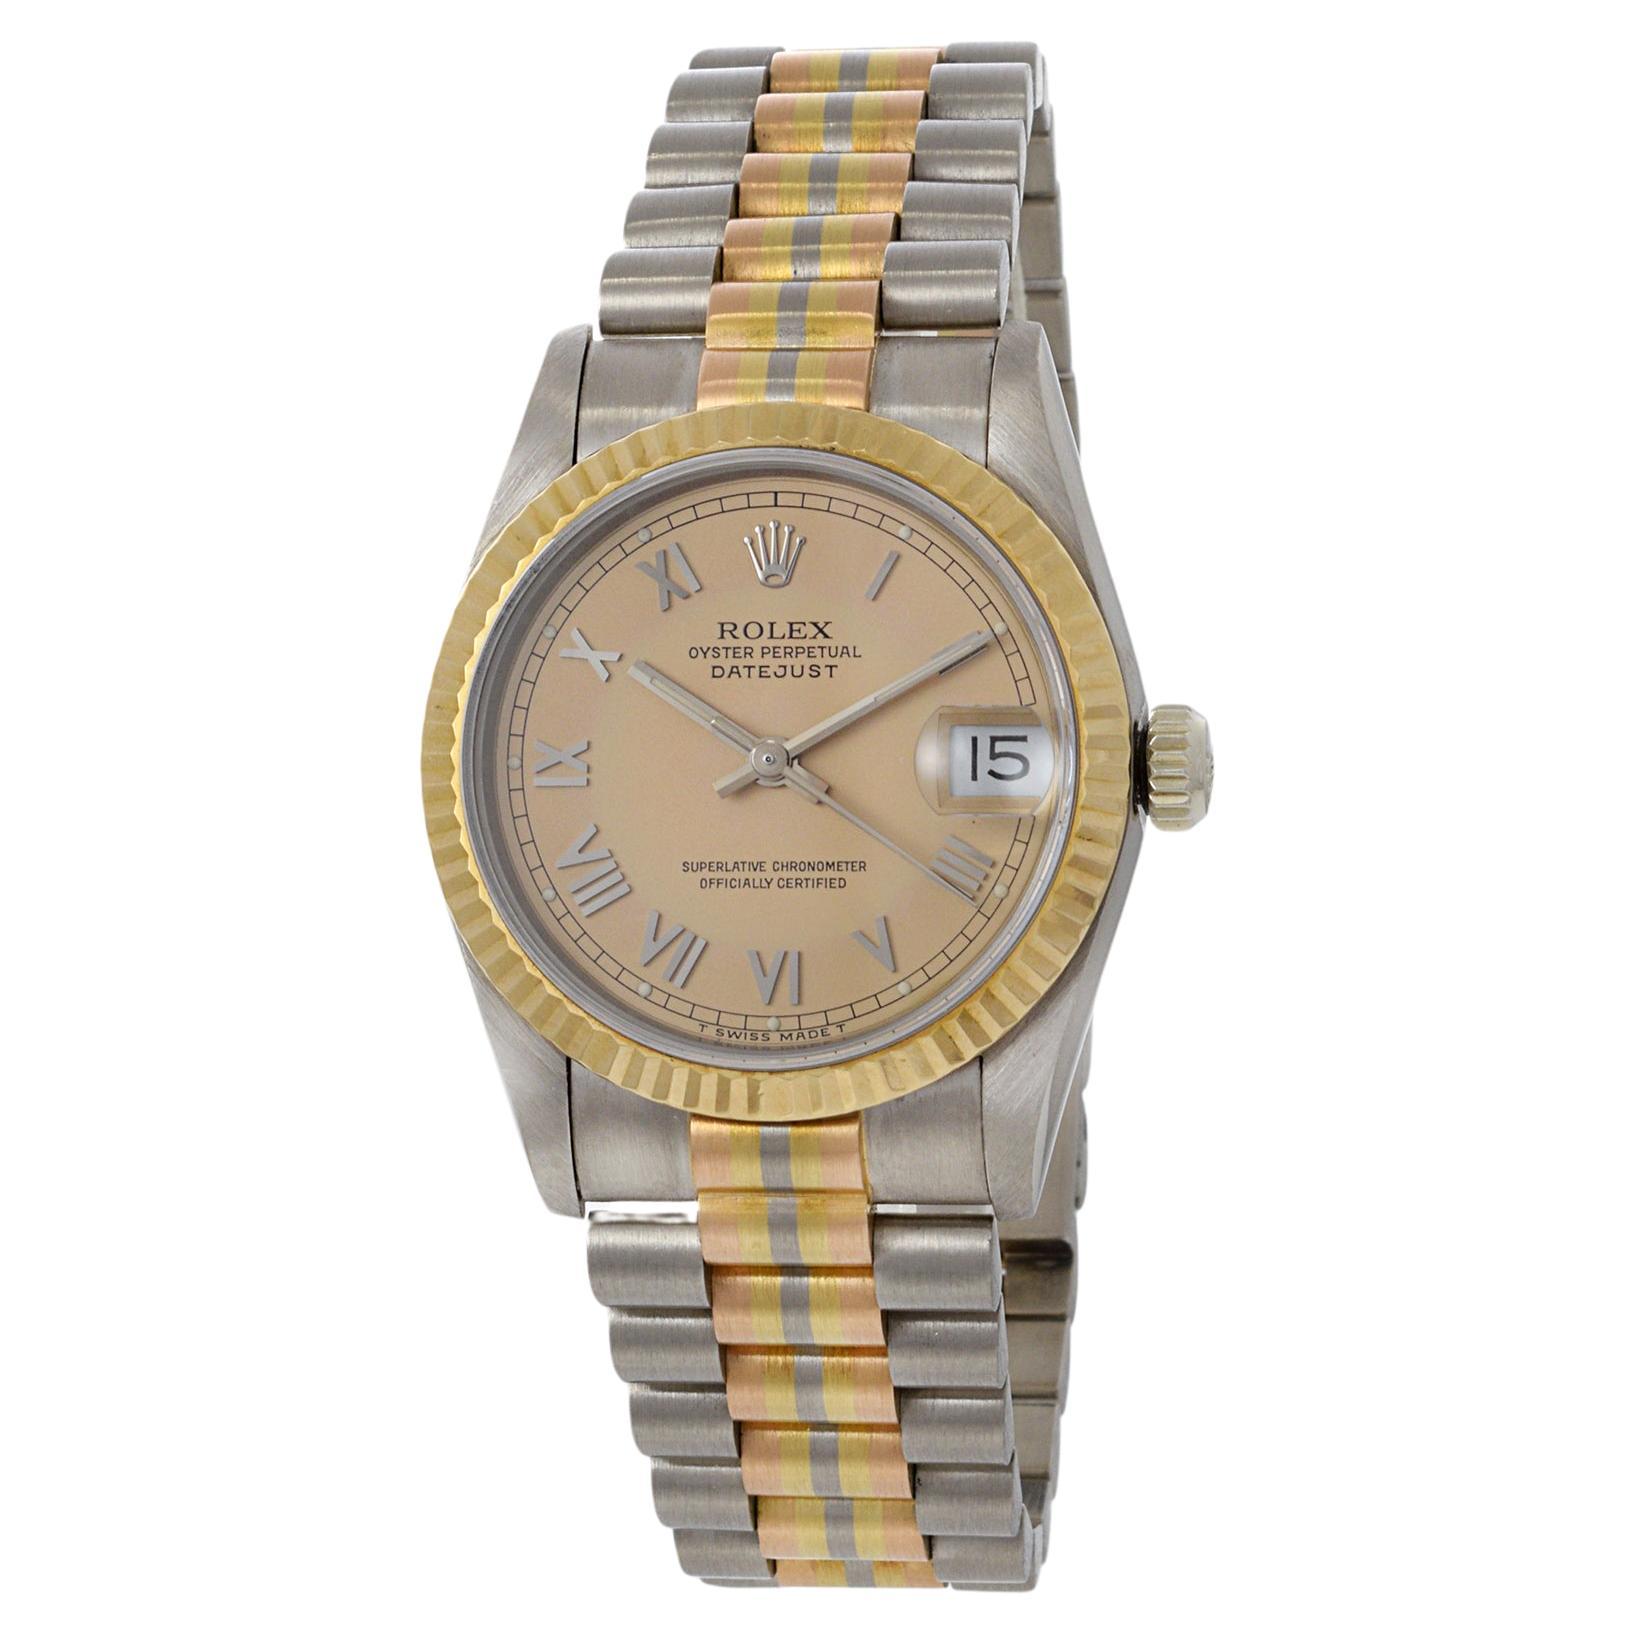 Rolex Datejust 31 Tridor 18K Yellow, White, and Rose Gold